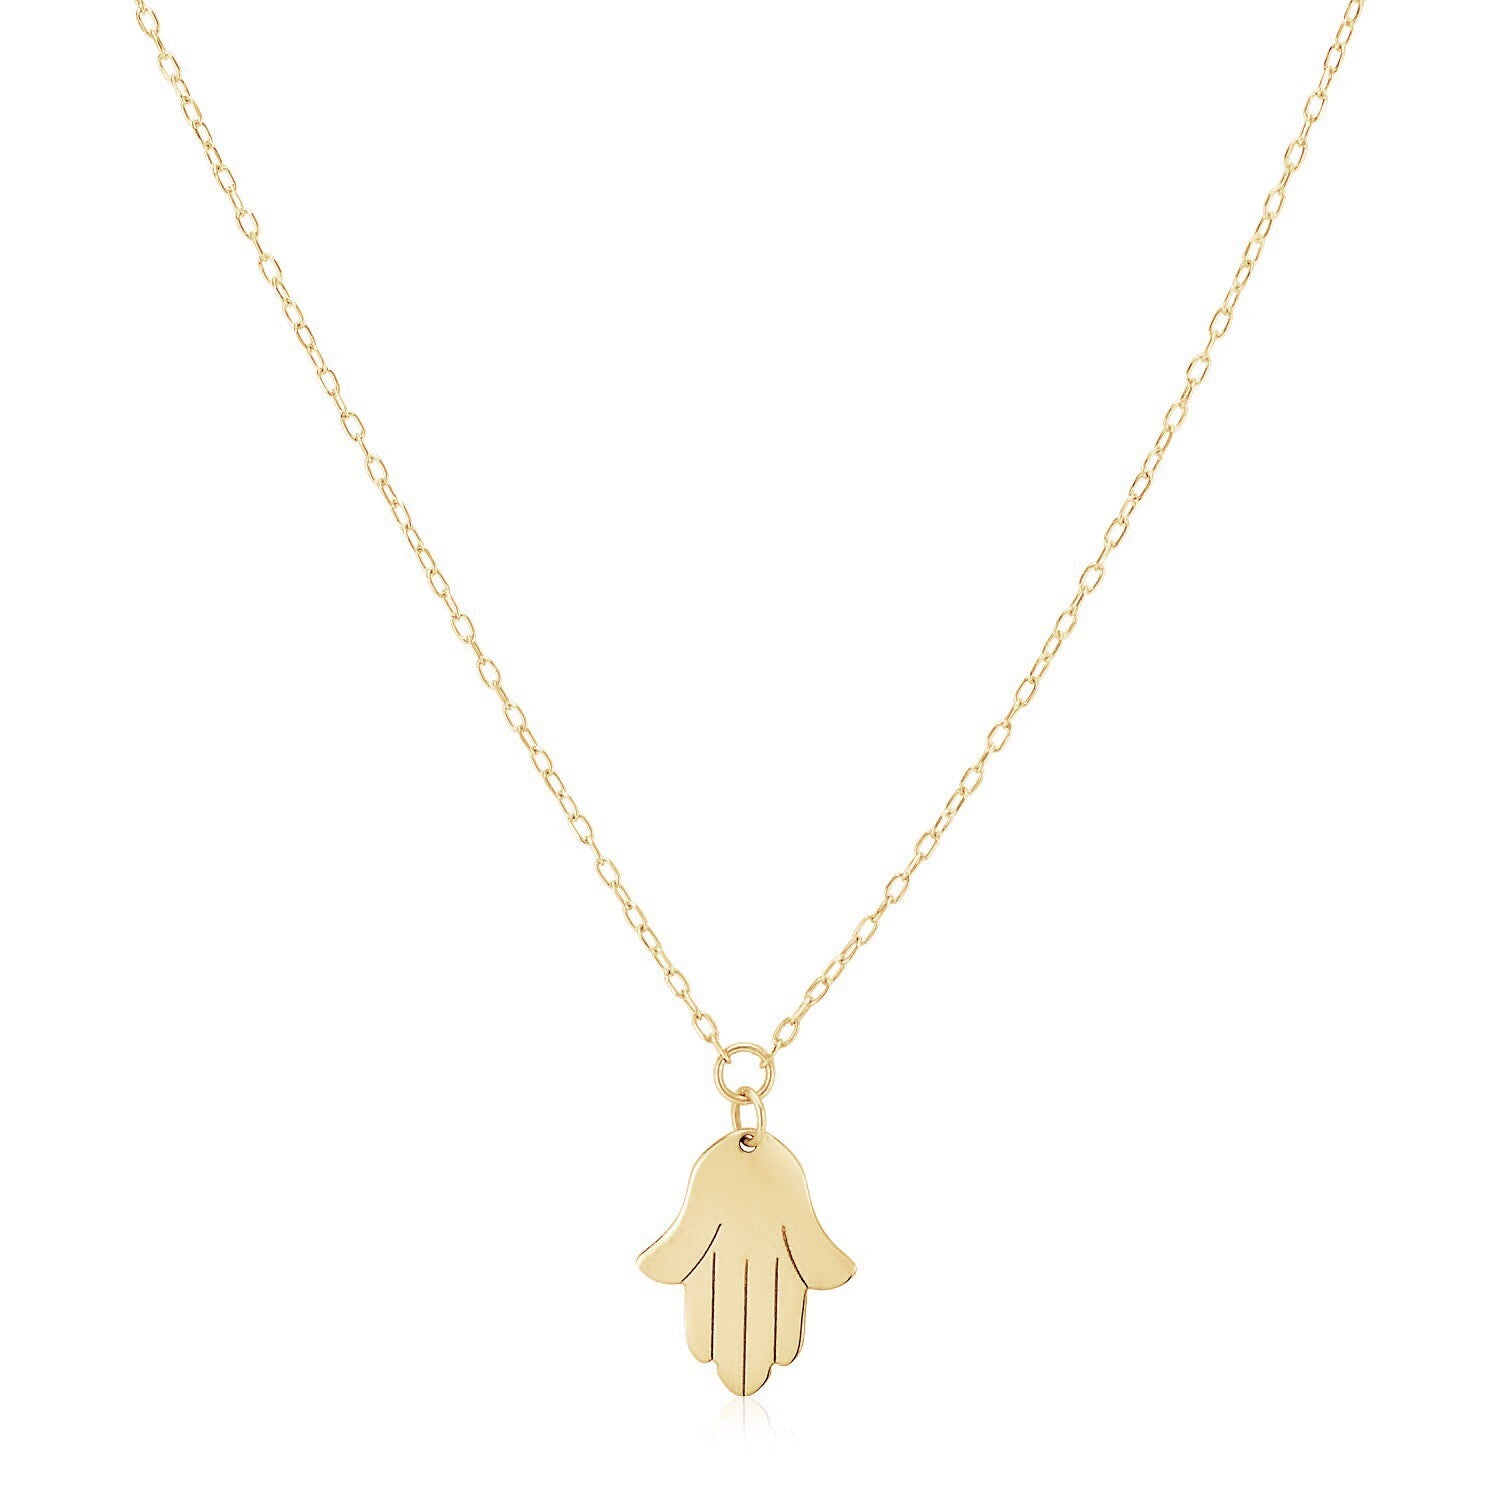 14K Yellow Gold Hand of Hamsa Necklace, size 18''